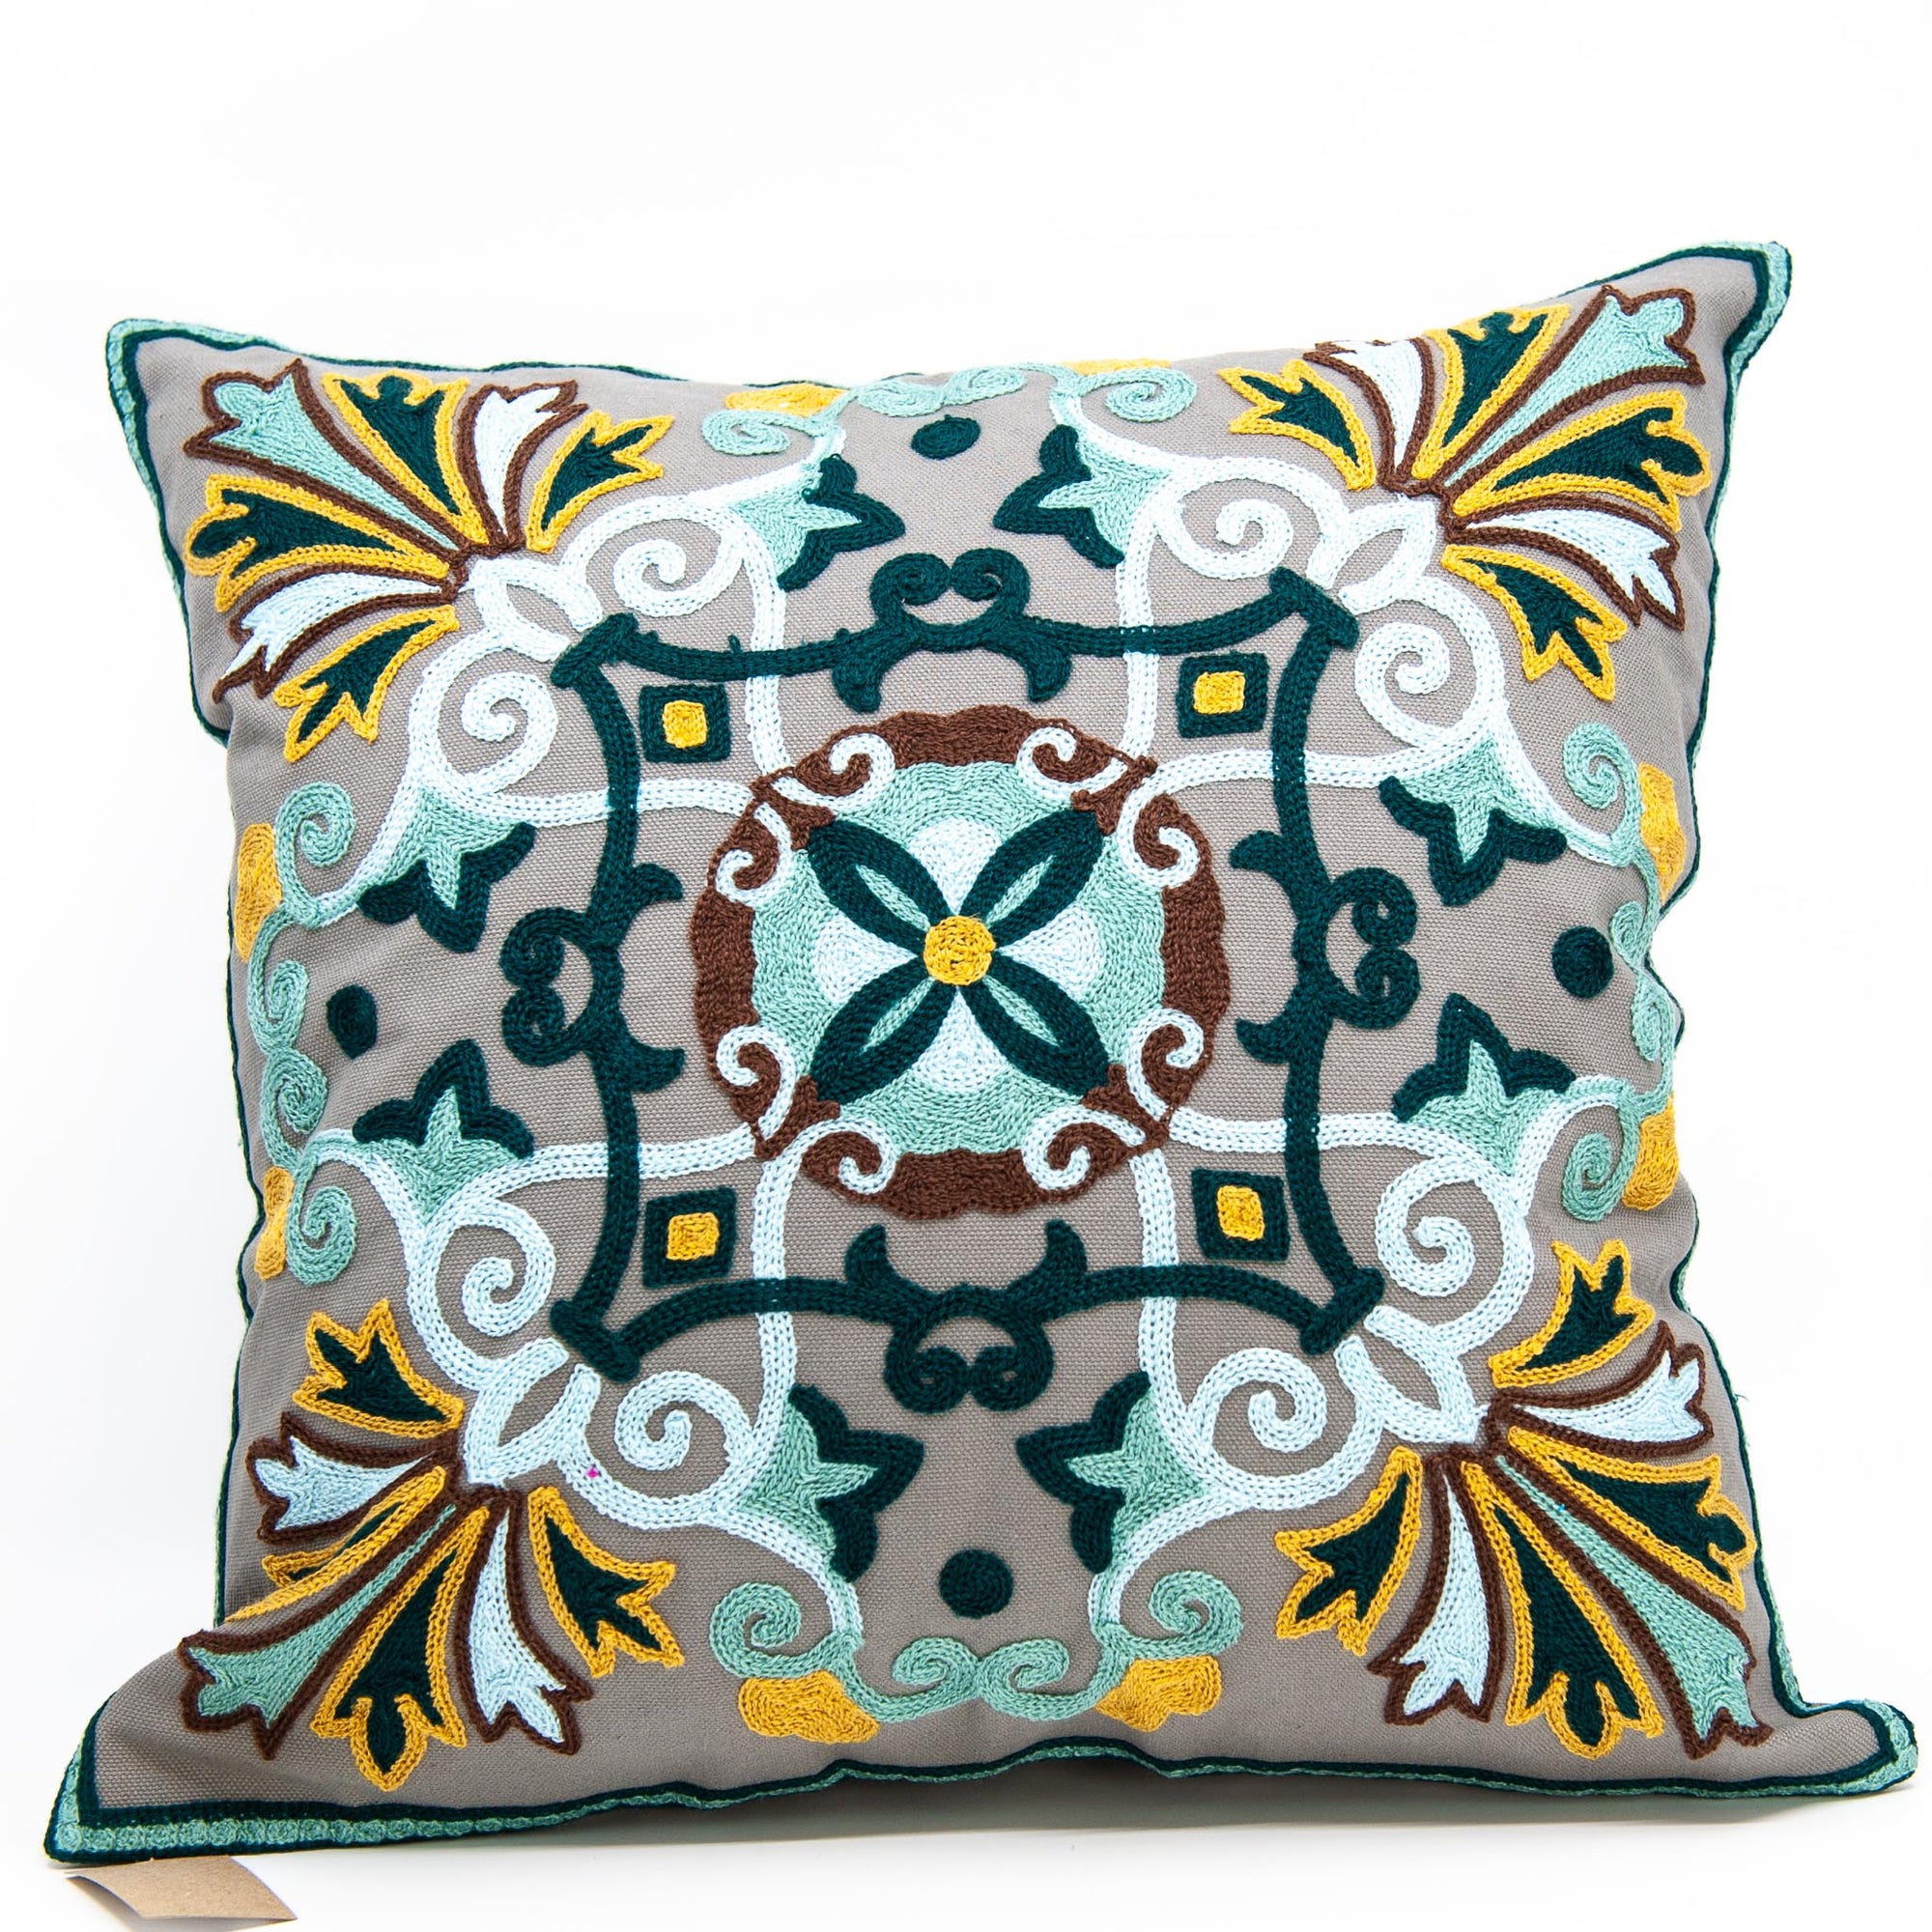 Embroidered Pillow Cover - Grey Flower